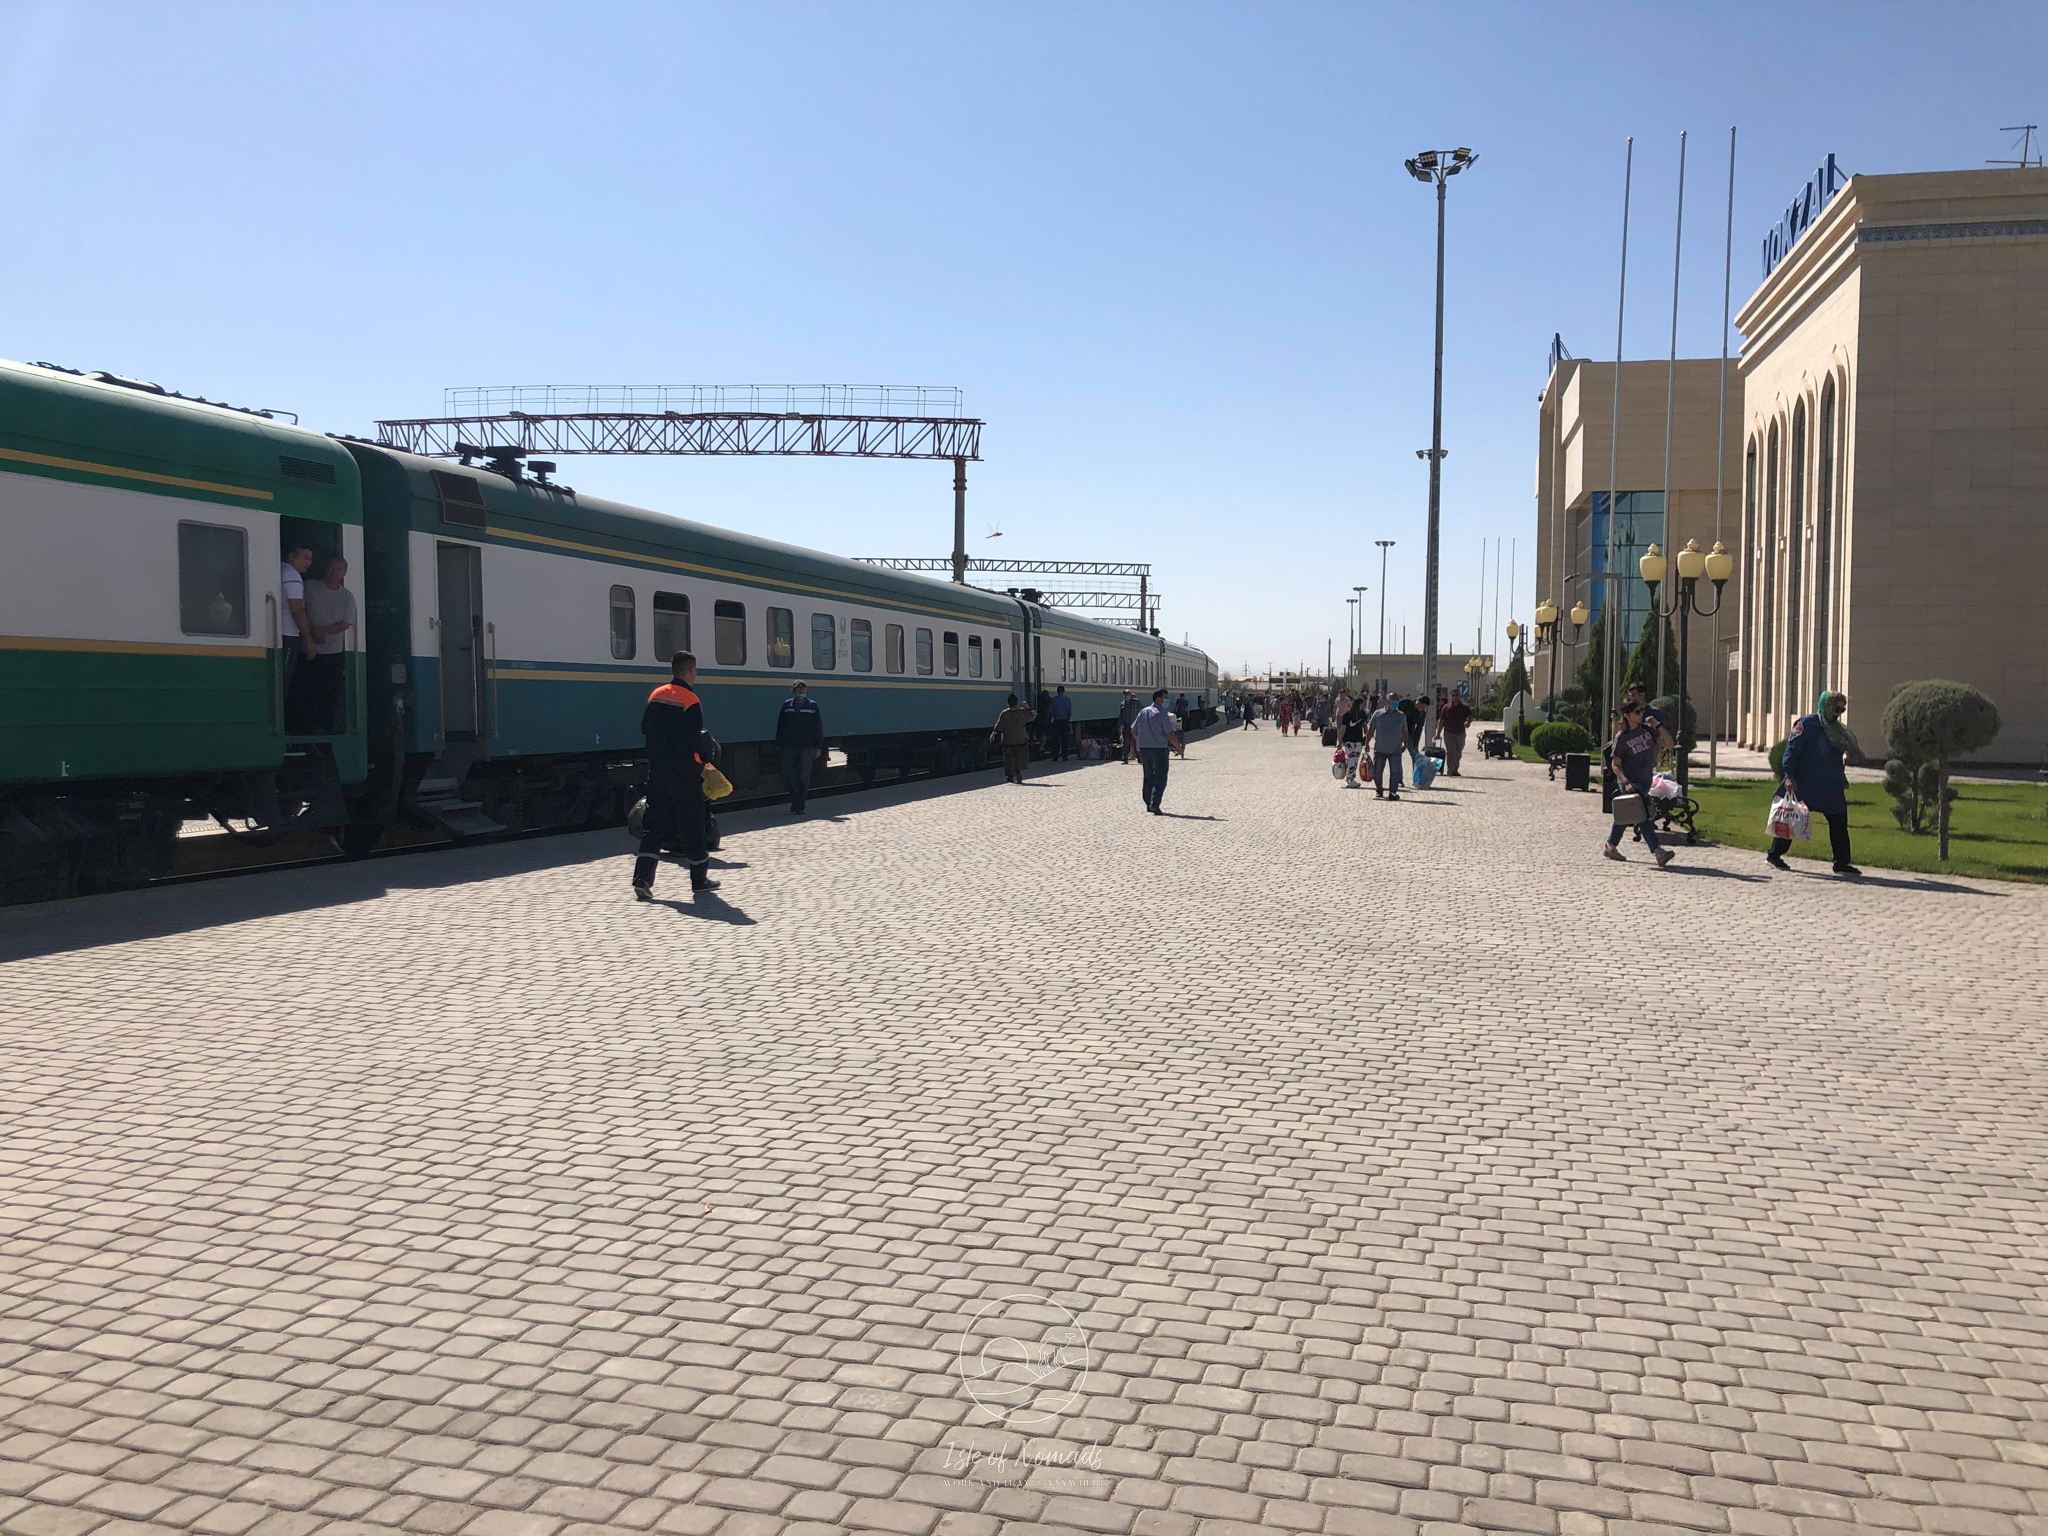 Arriving at the train station in Khiva